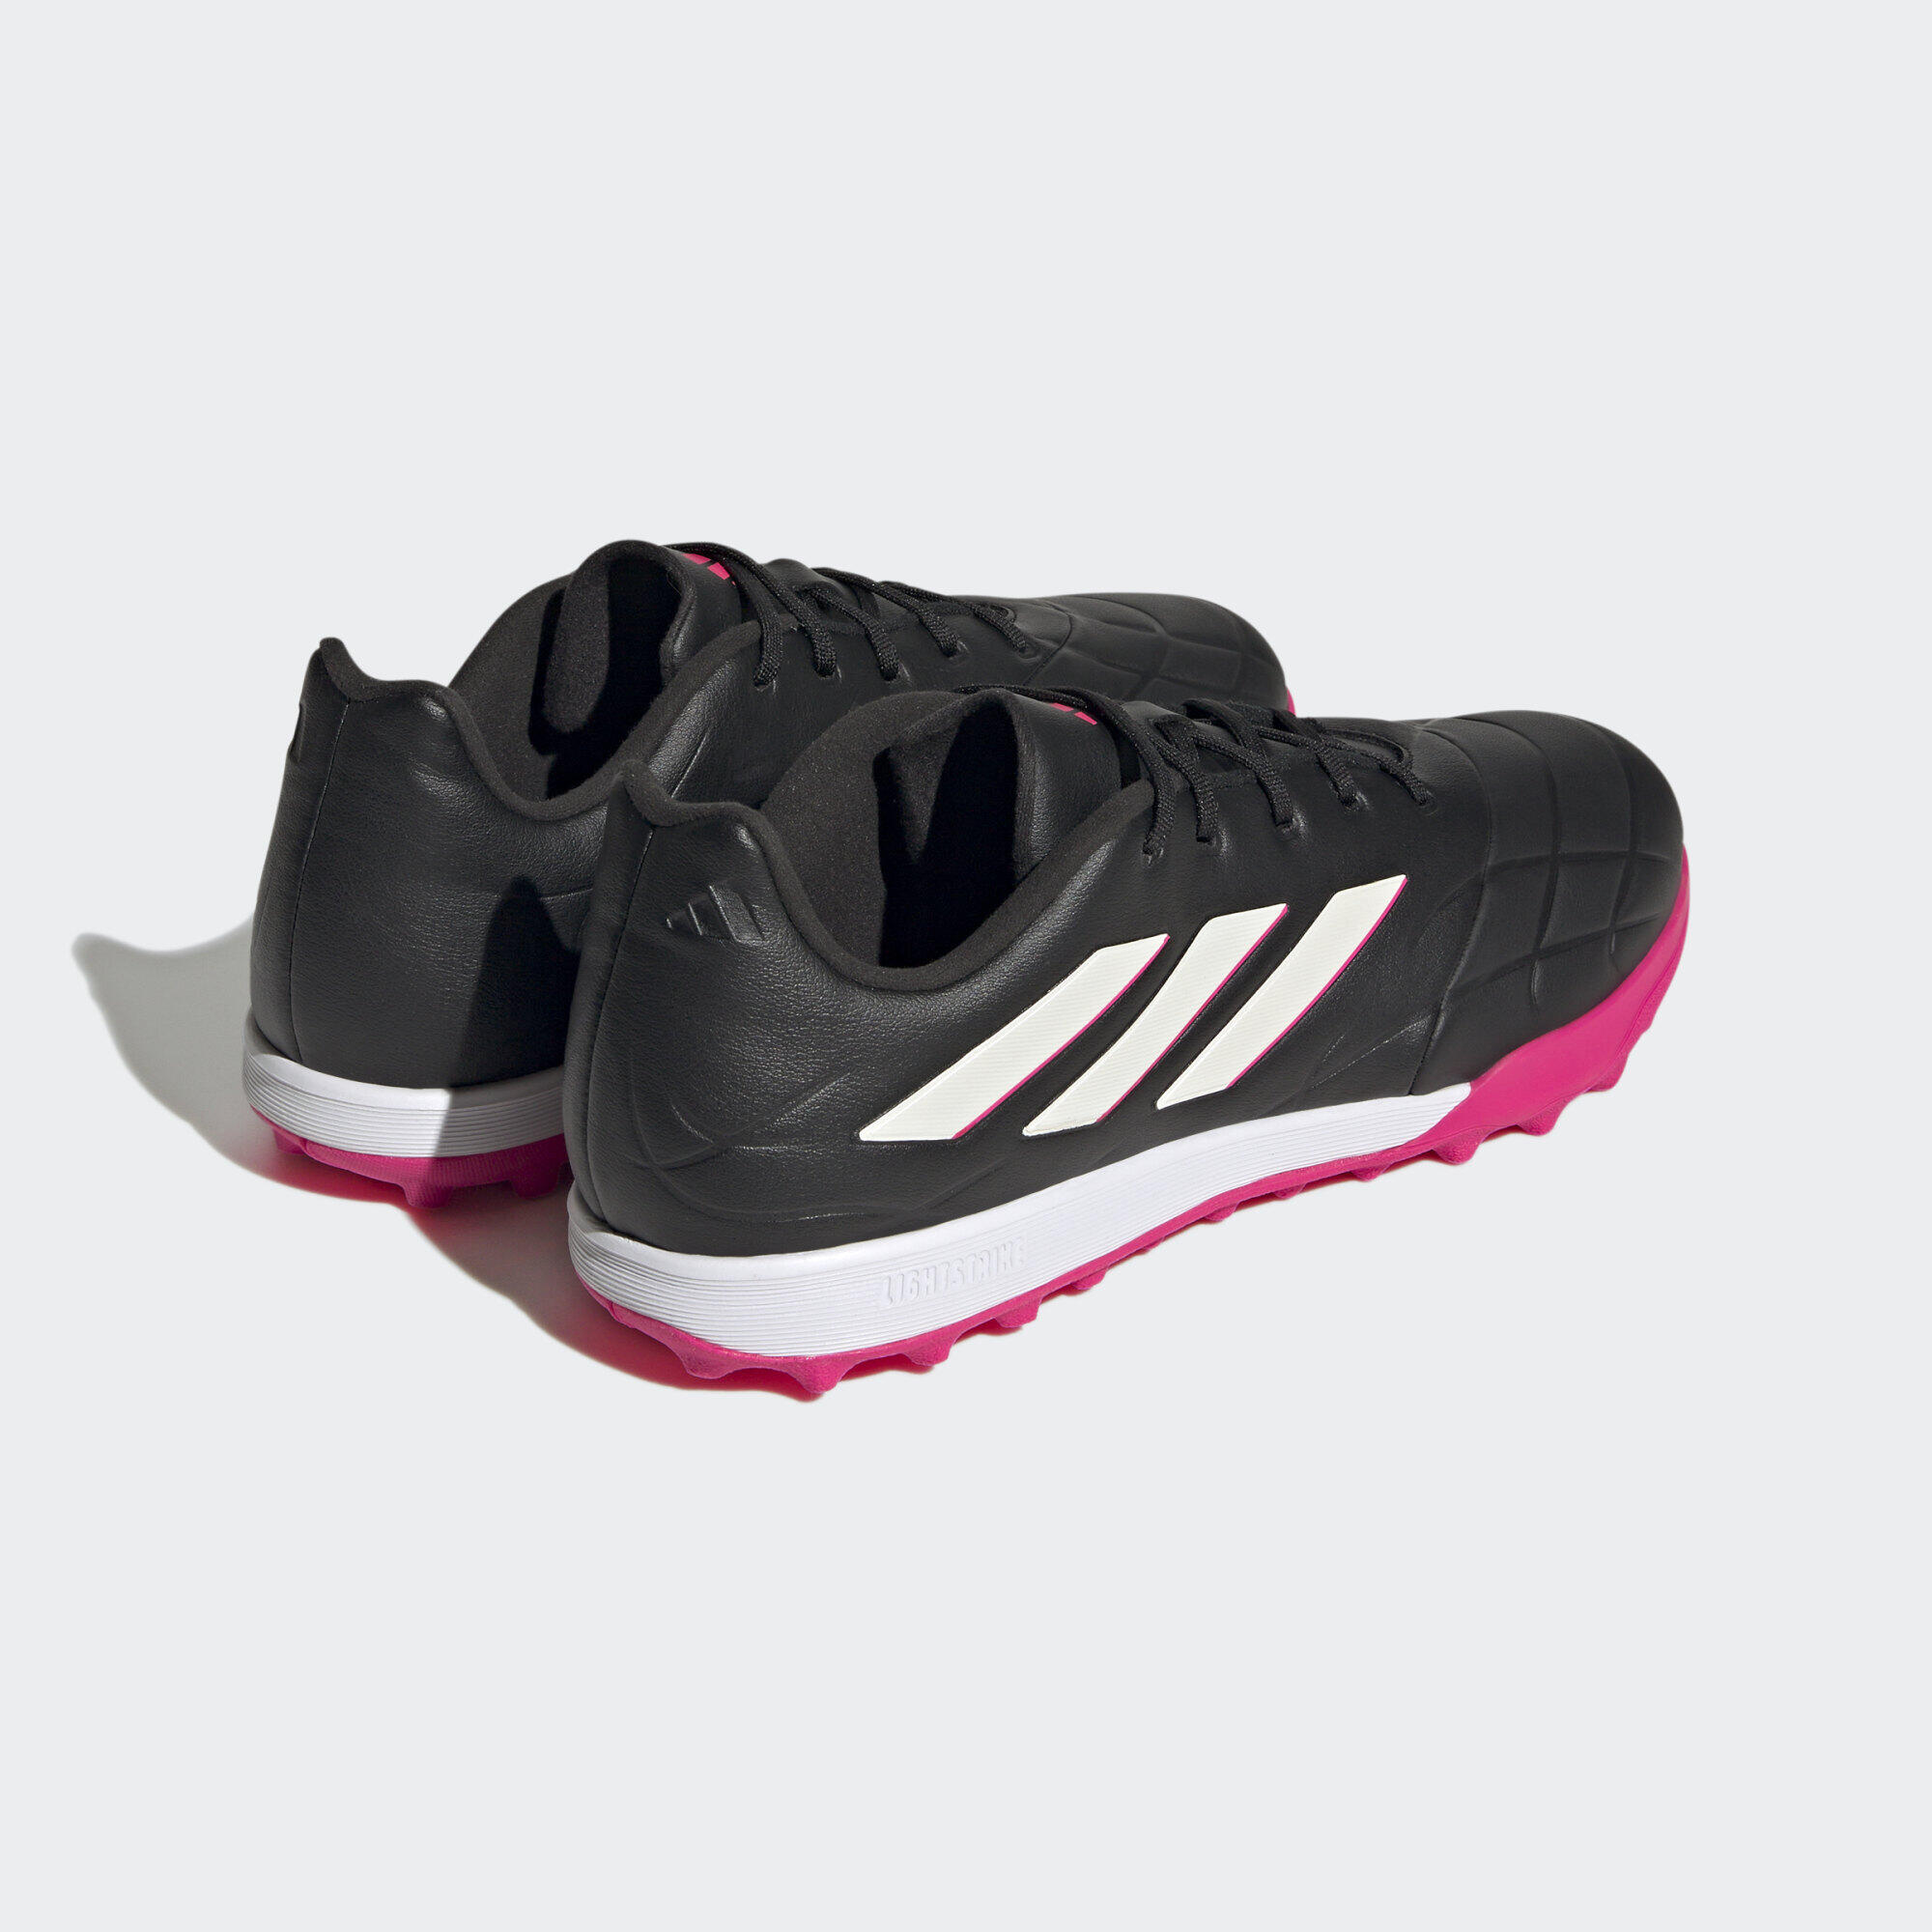 Copa Pure.3 Turf Boots 7/7